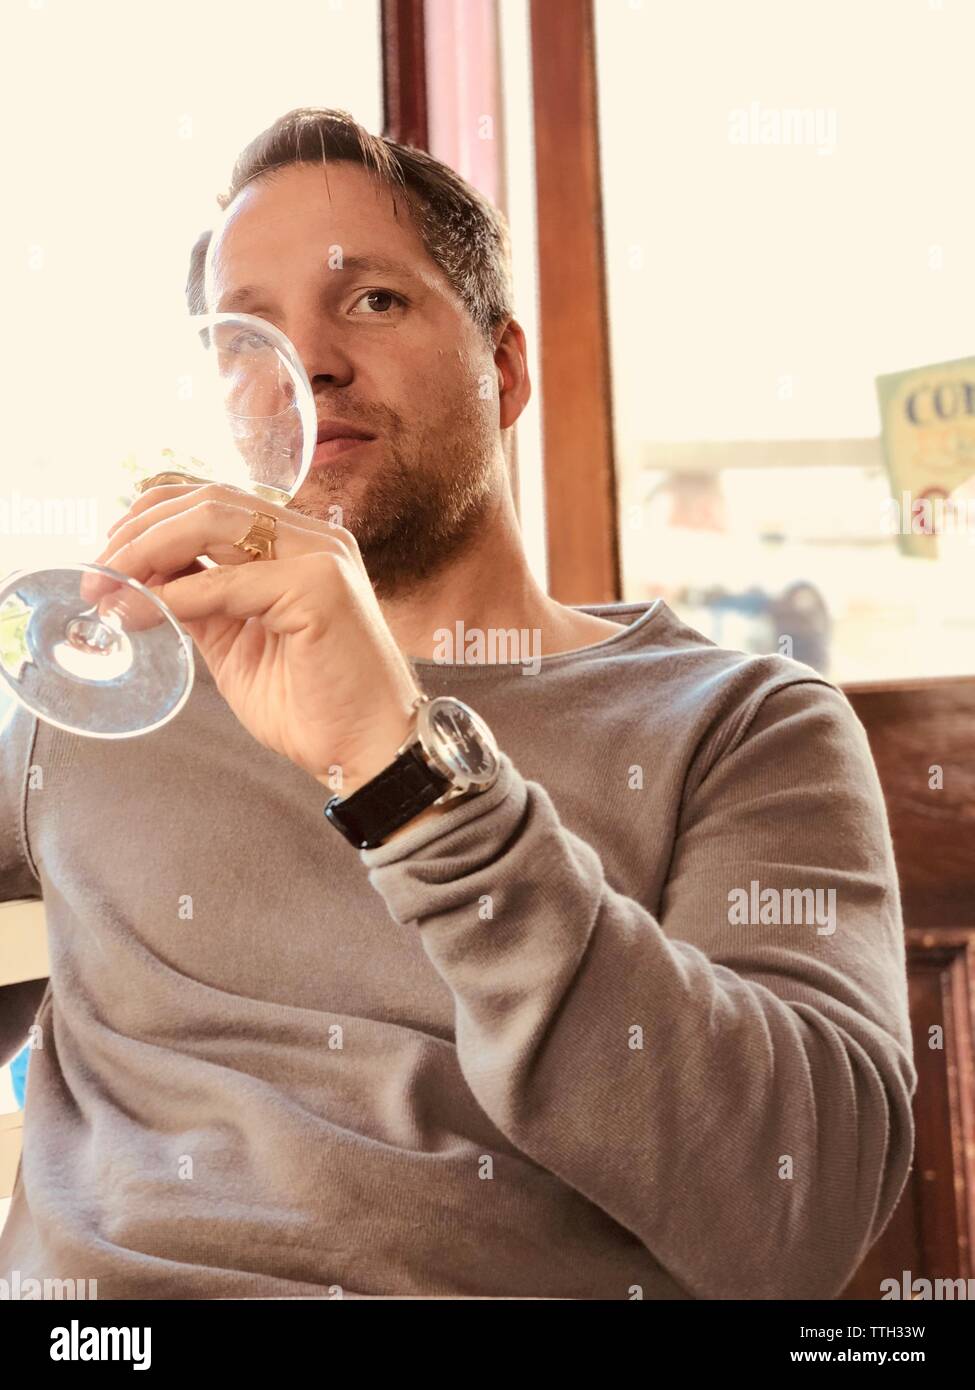 Man taking a glass of white wine with a seriously face Stock Photo